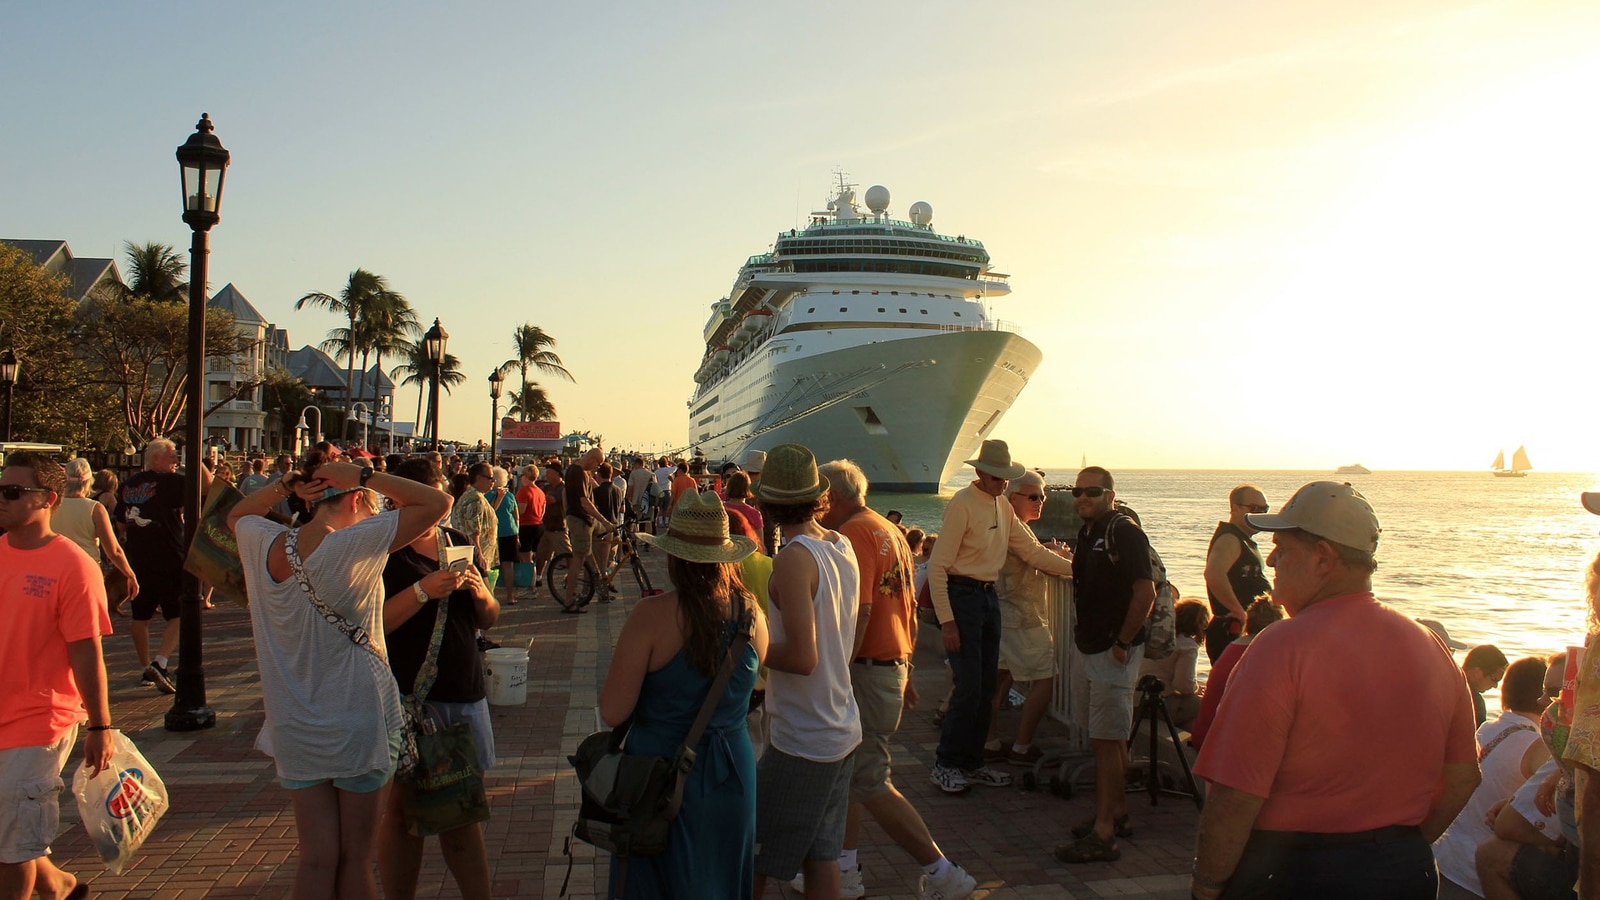 Best Place To Watch The Sunset In Key West - Mallory Square